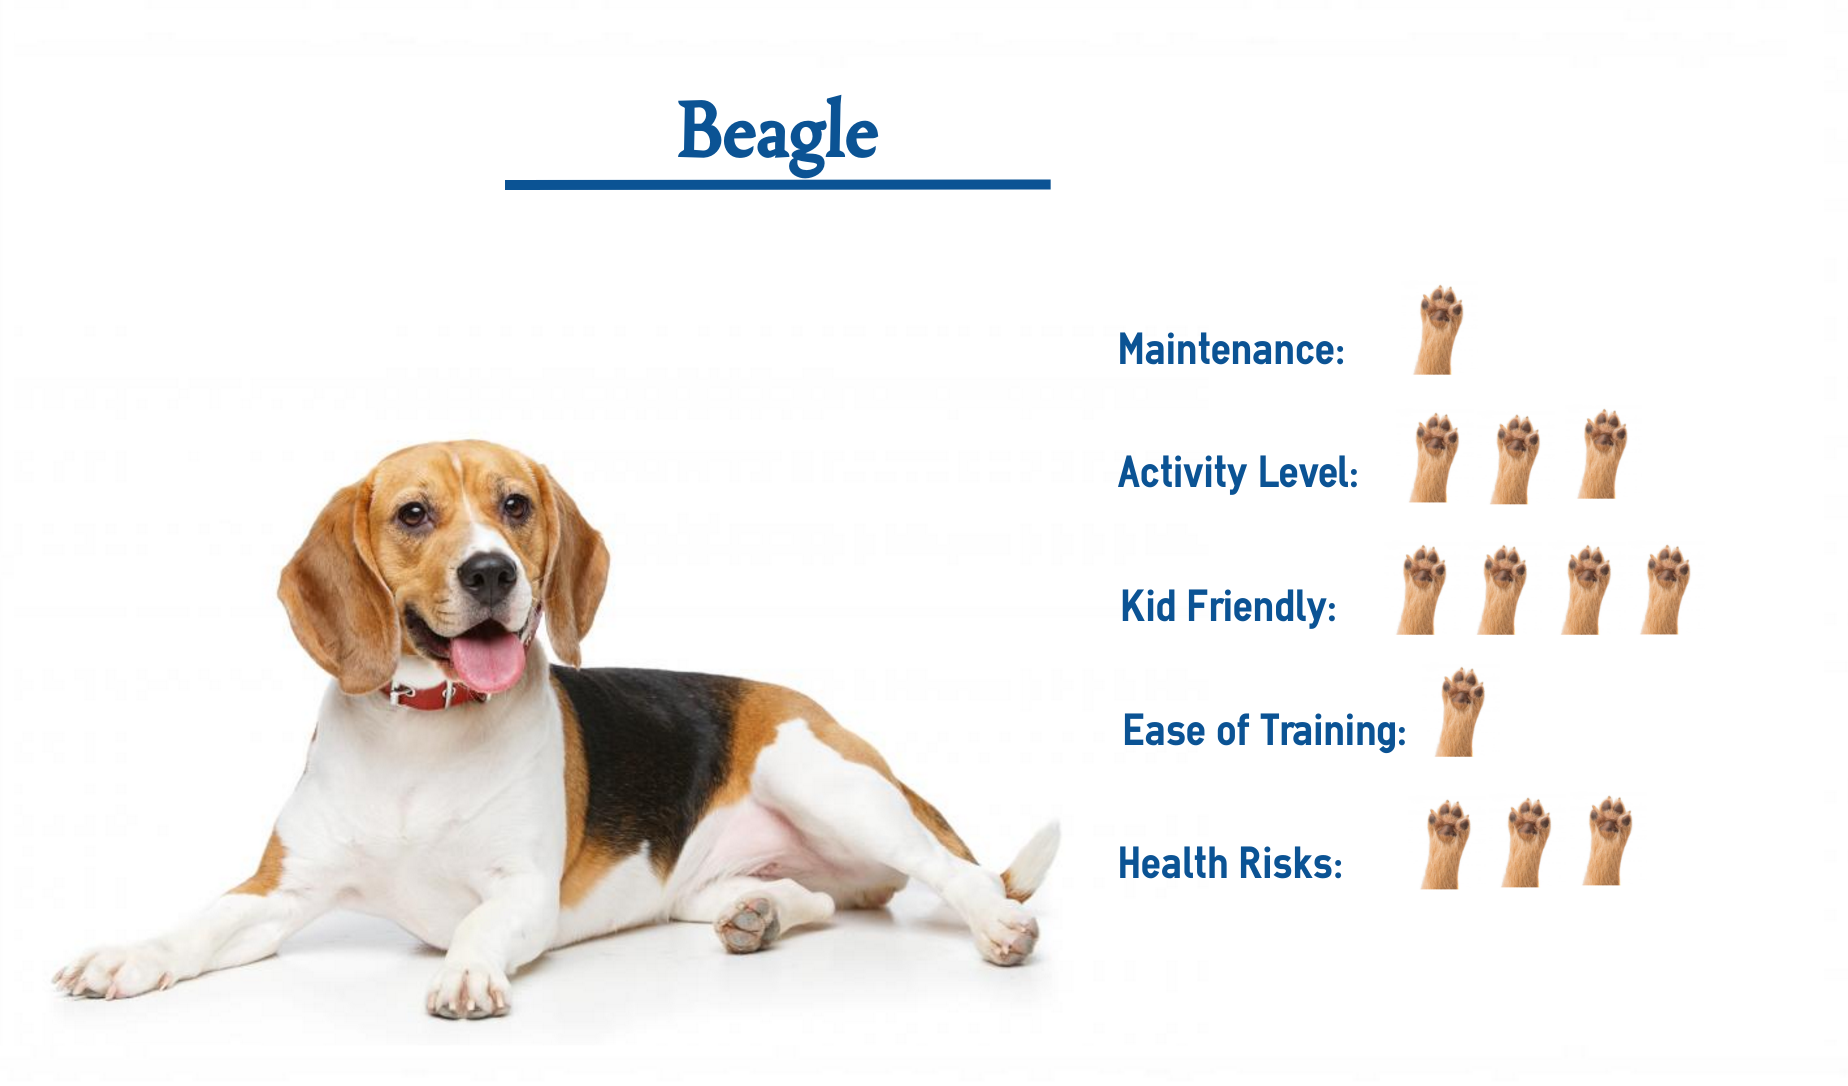 what are the needs of a beagle?